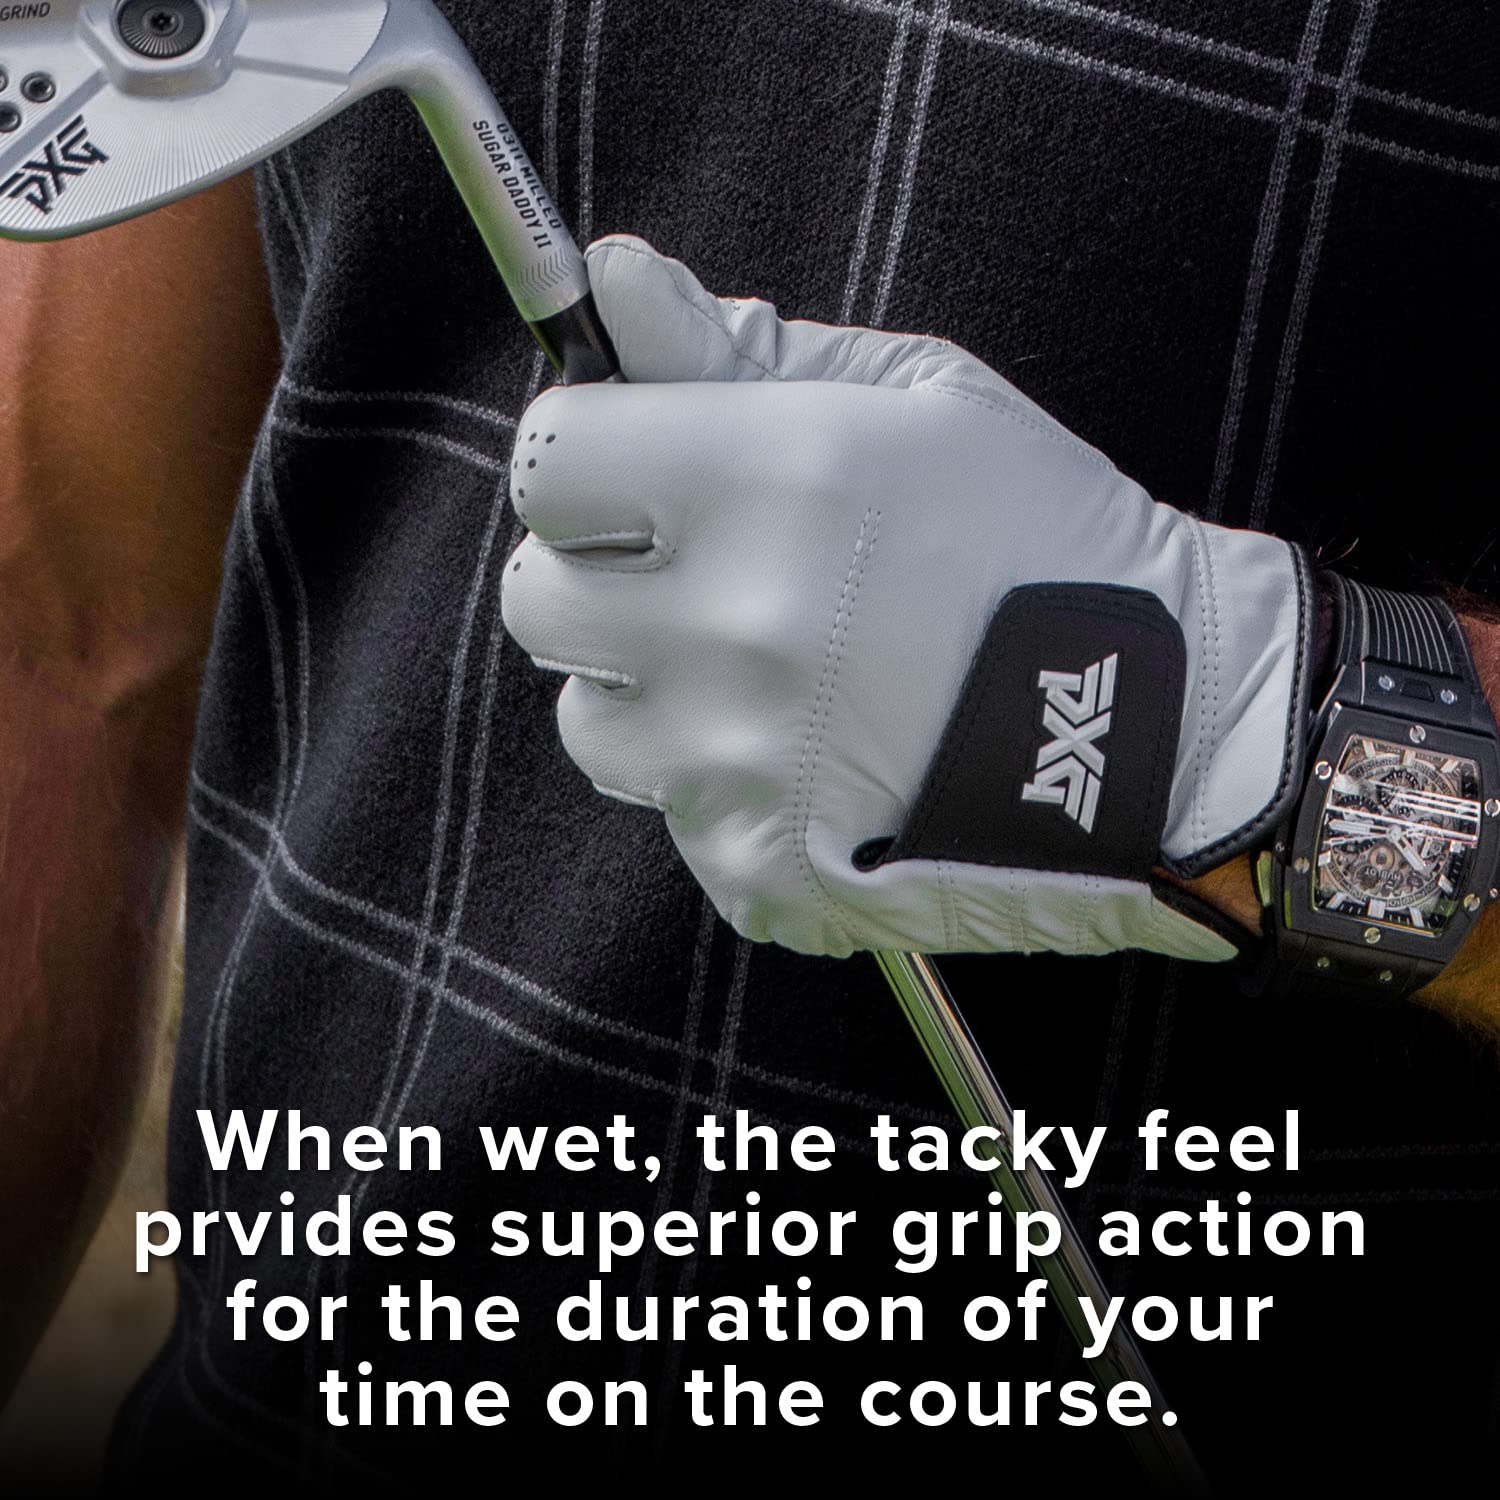 PXG Men's Players Premium Fit Golf Glove - Buttery Soft Leather with Cotton-Based Elastic Wristband